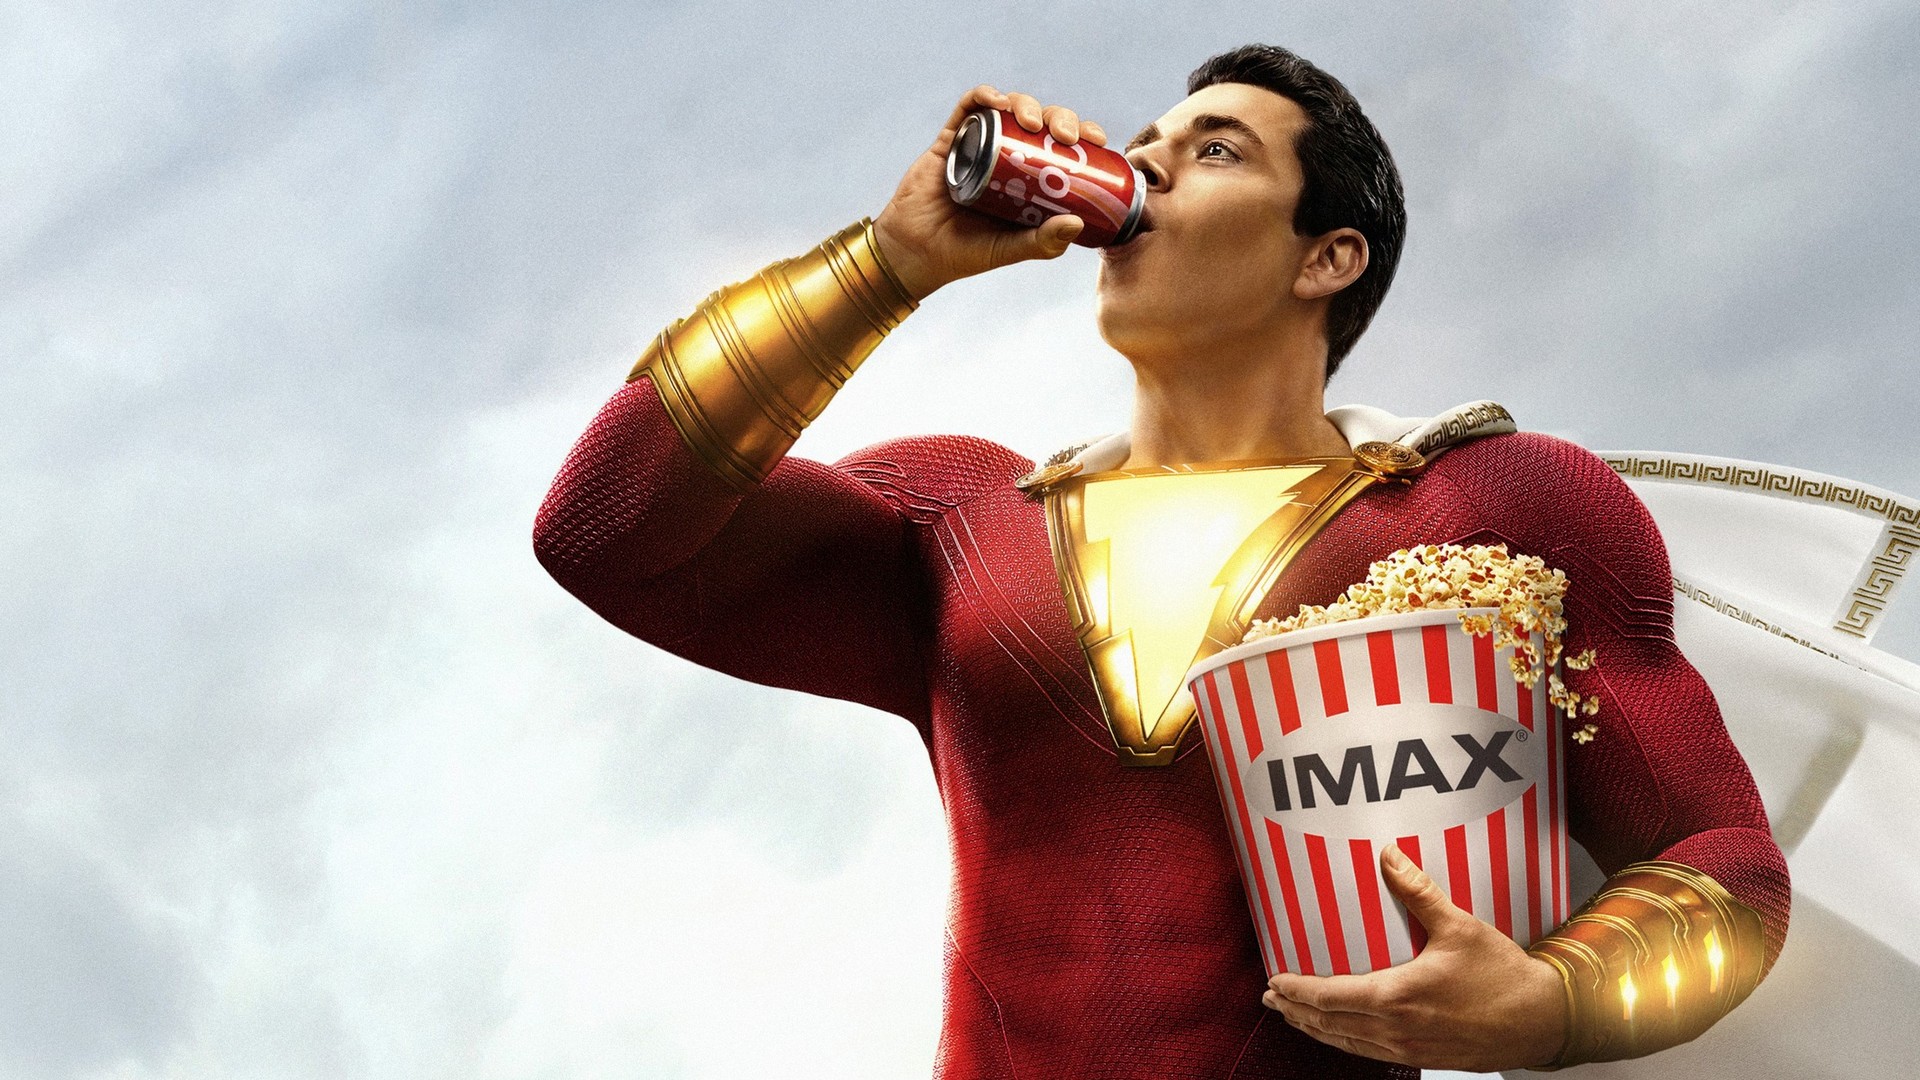 Shazam! 2019 Wallpaper HD with high-resolution 1920x1080 pixel. You can use this poster wallpaper for your Desktop Computers, Mac Screensavers, Windows Backgrounds, iPhone Wallpapers, Tablet or Android Lock screen and another Mobile device